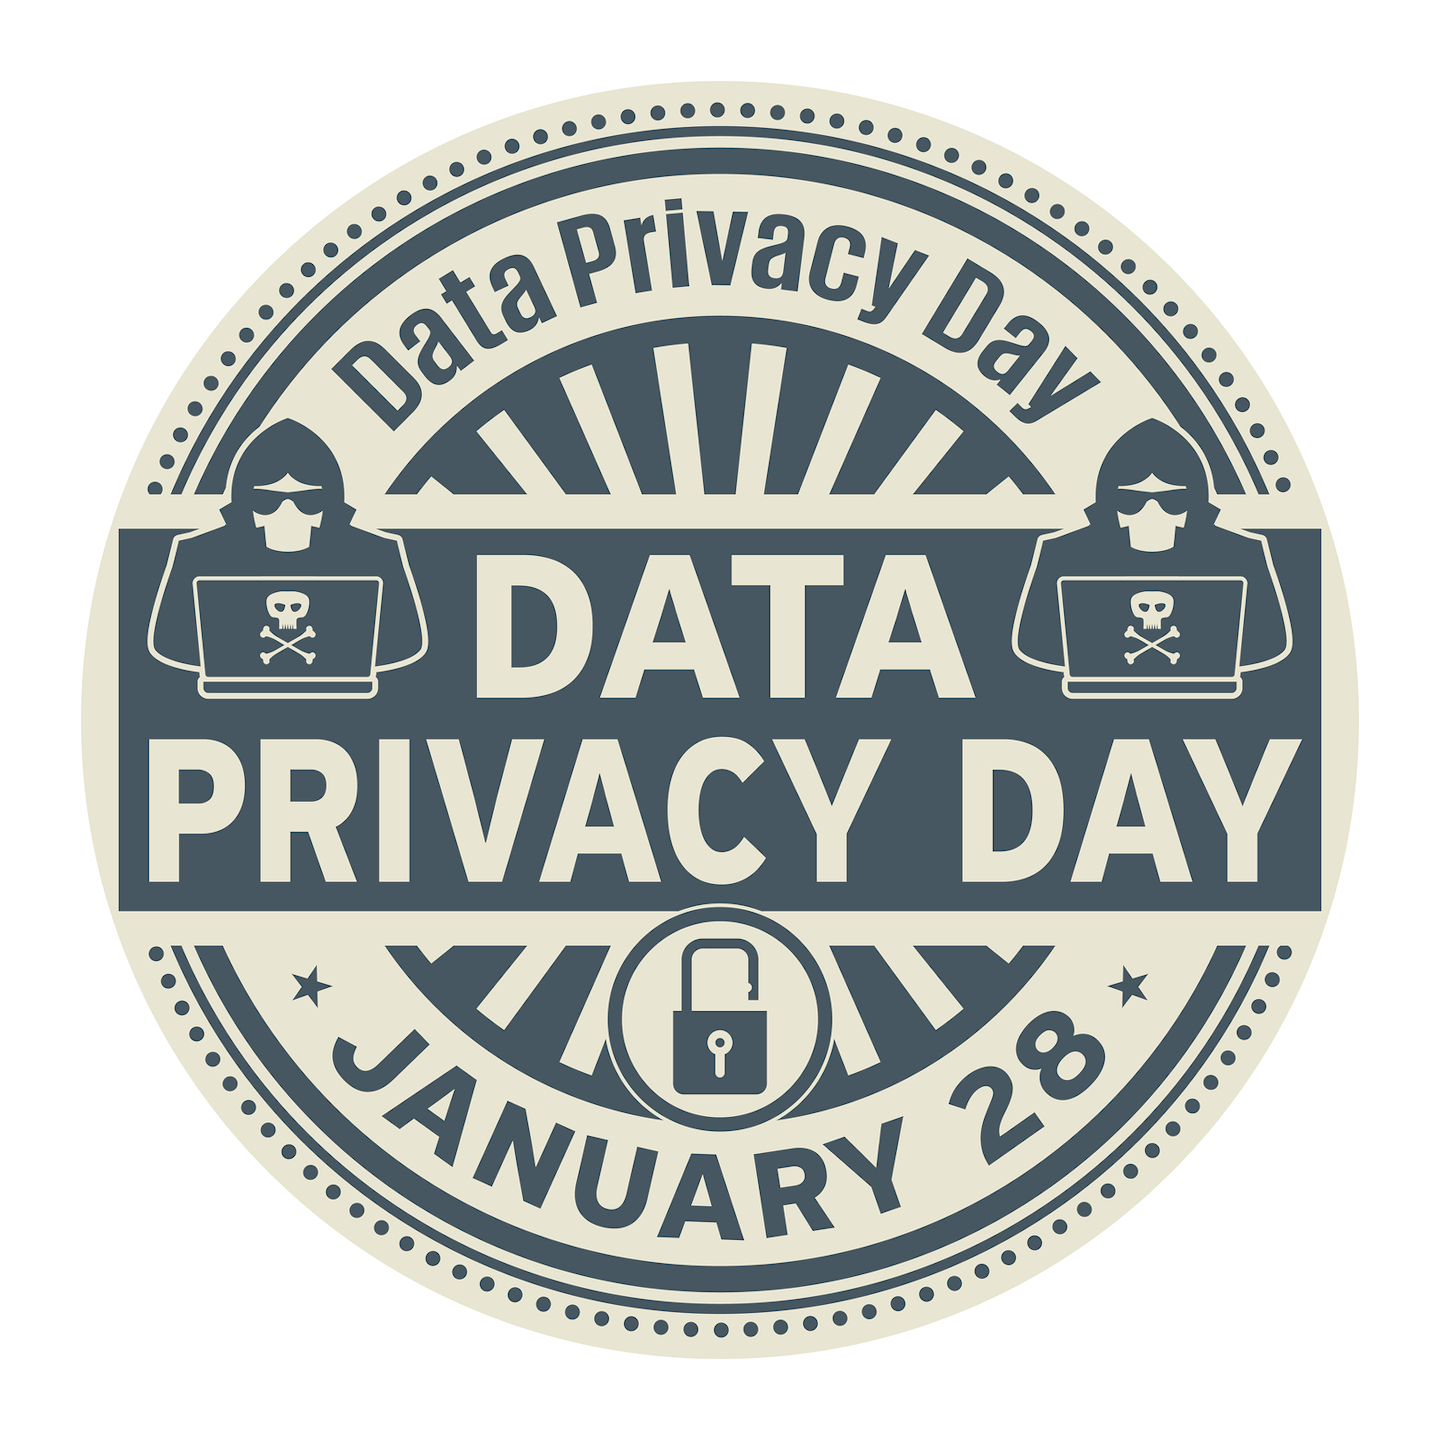 Data Privacy Day highlights the gap between perception and reality as